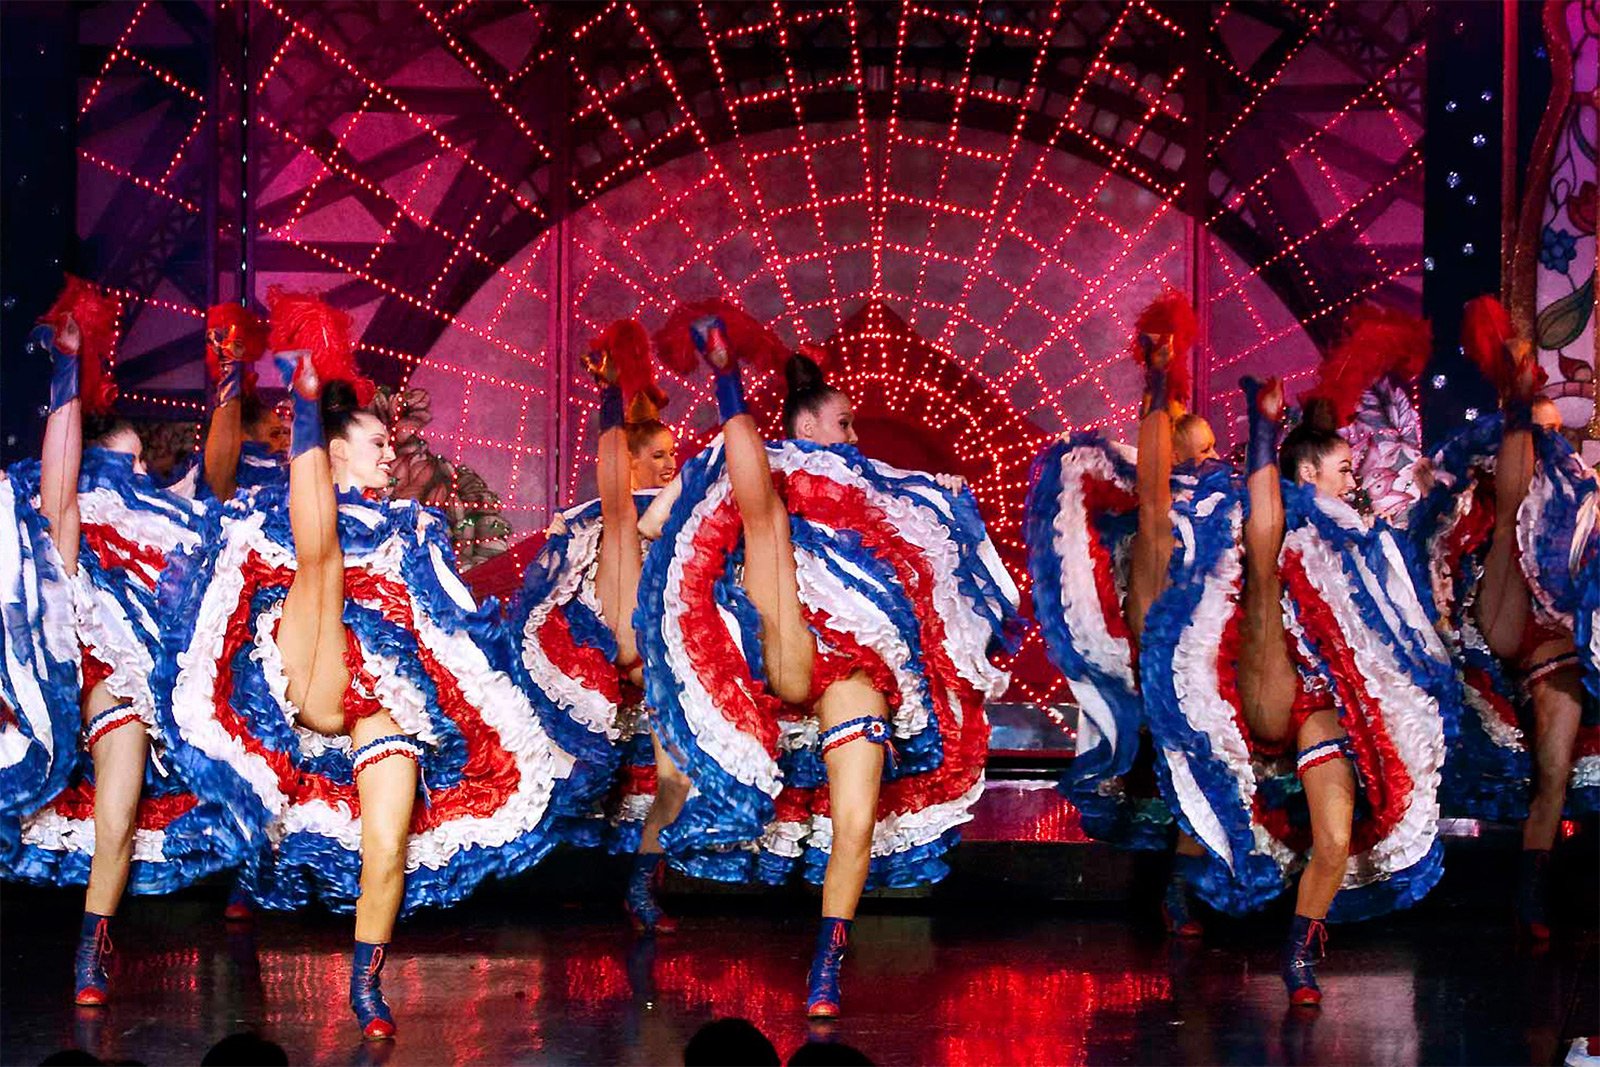 How to see cancan at Moulin Rouge in Paris